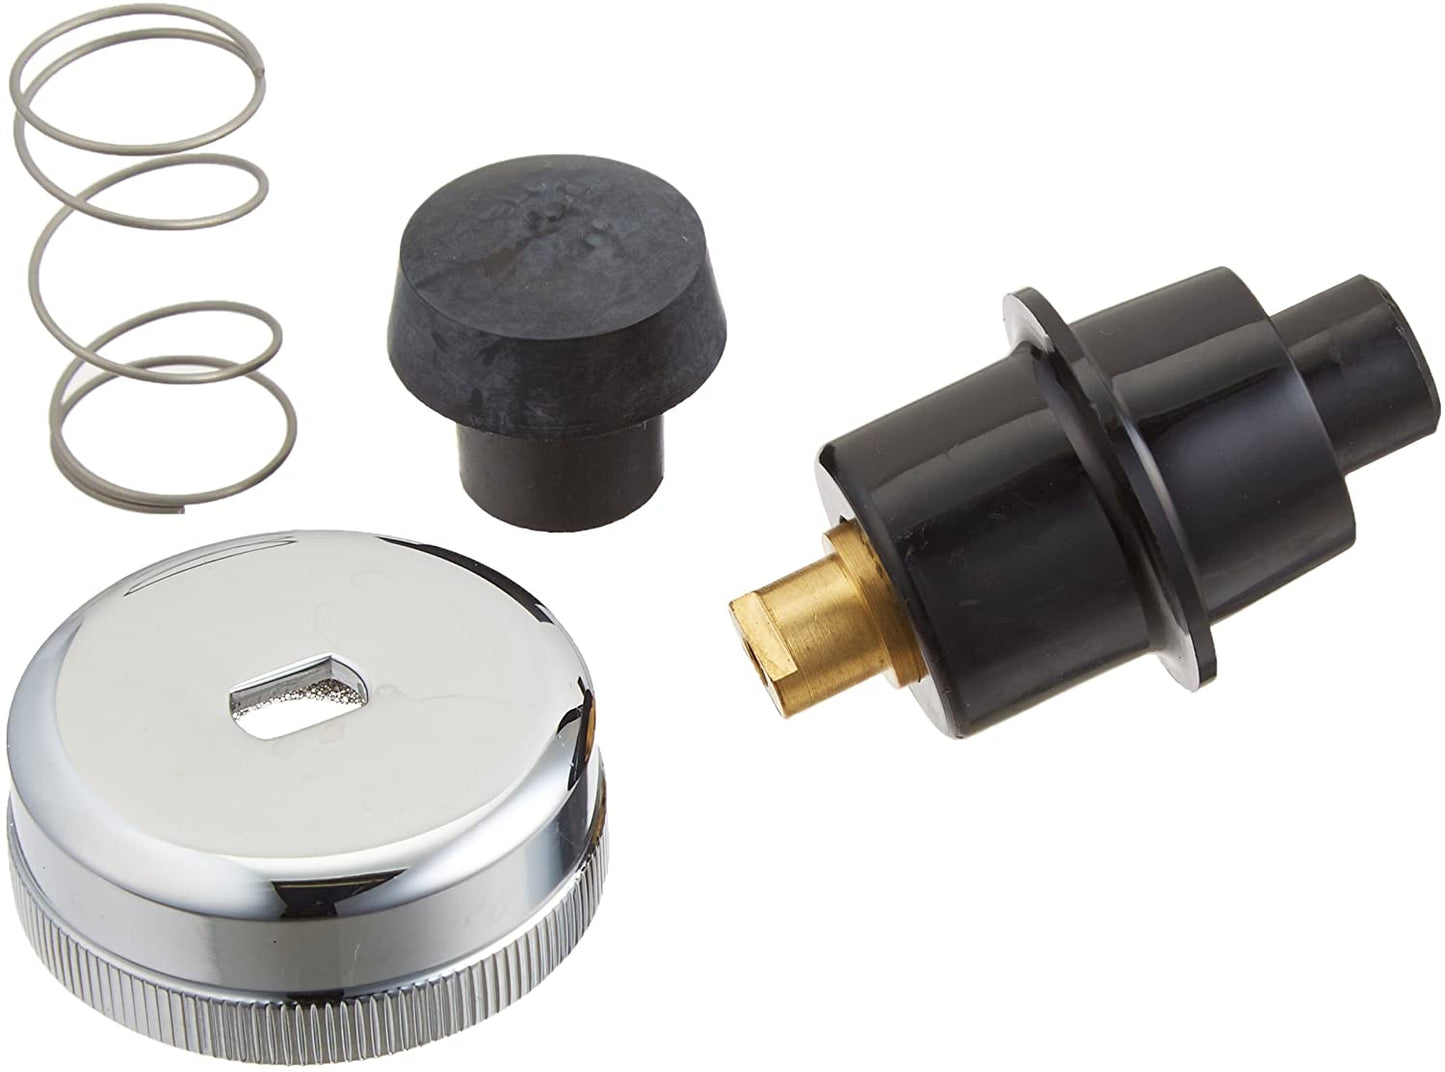 Sloan 3308858 - 3/4 in. Handle Stop Replacement Kit